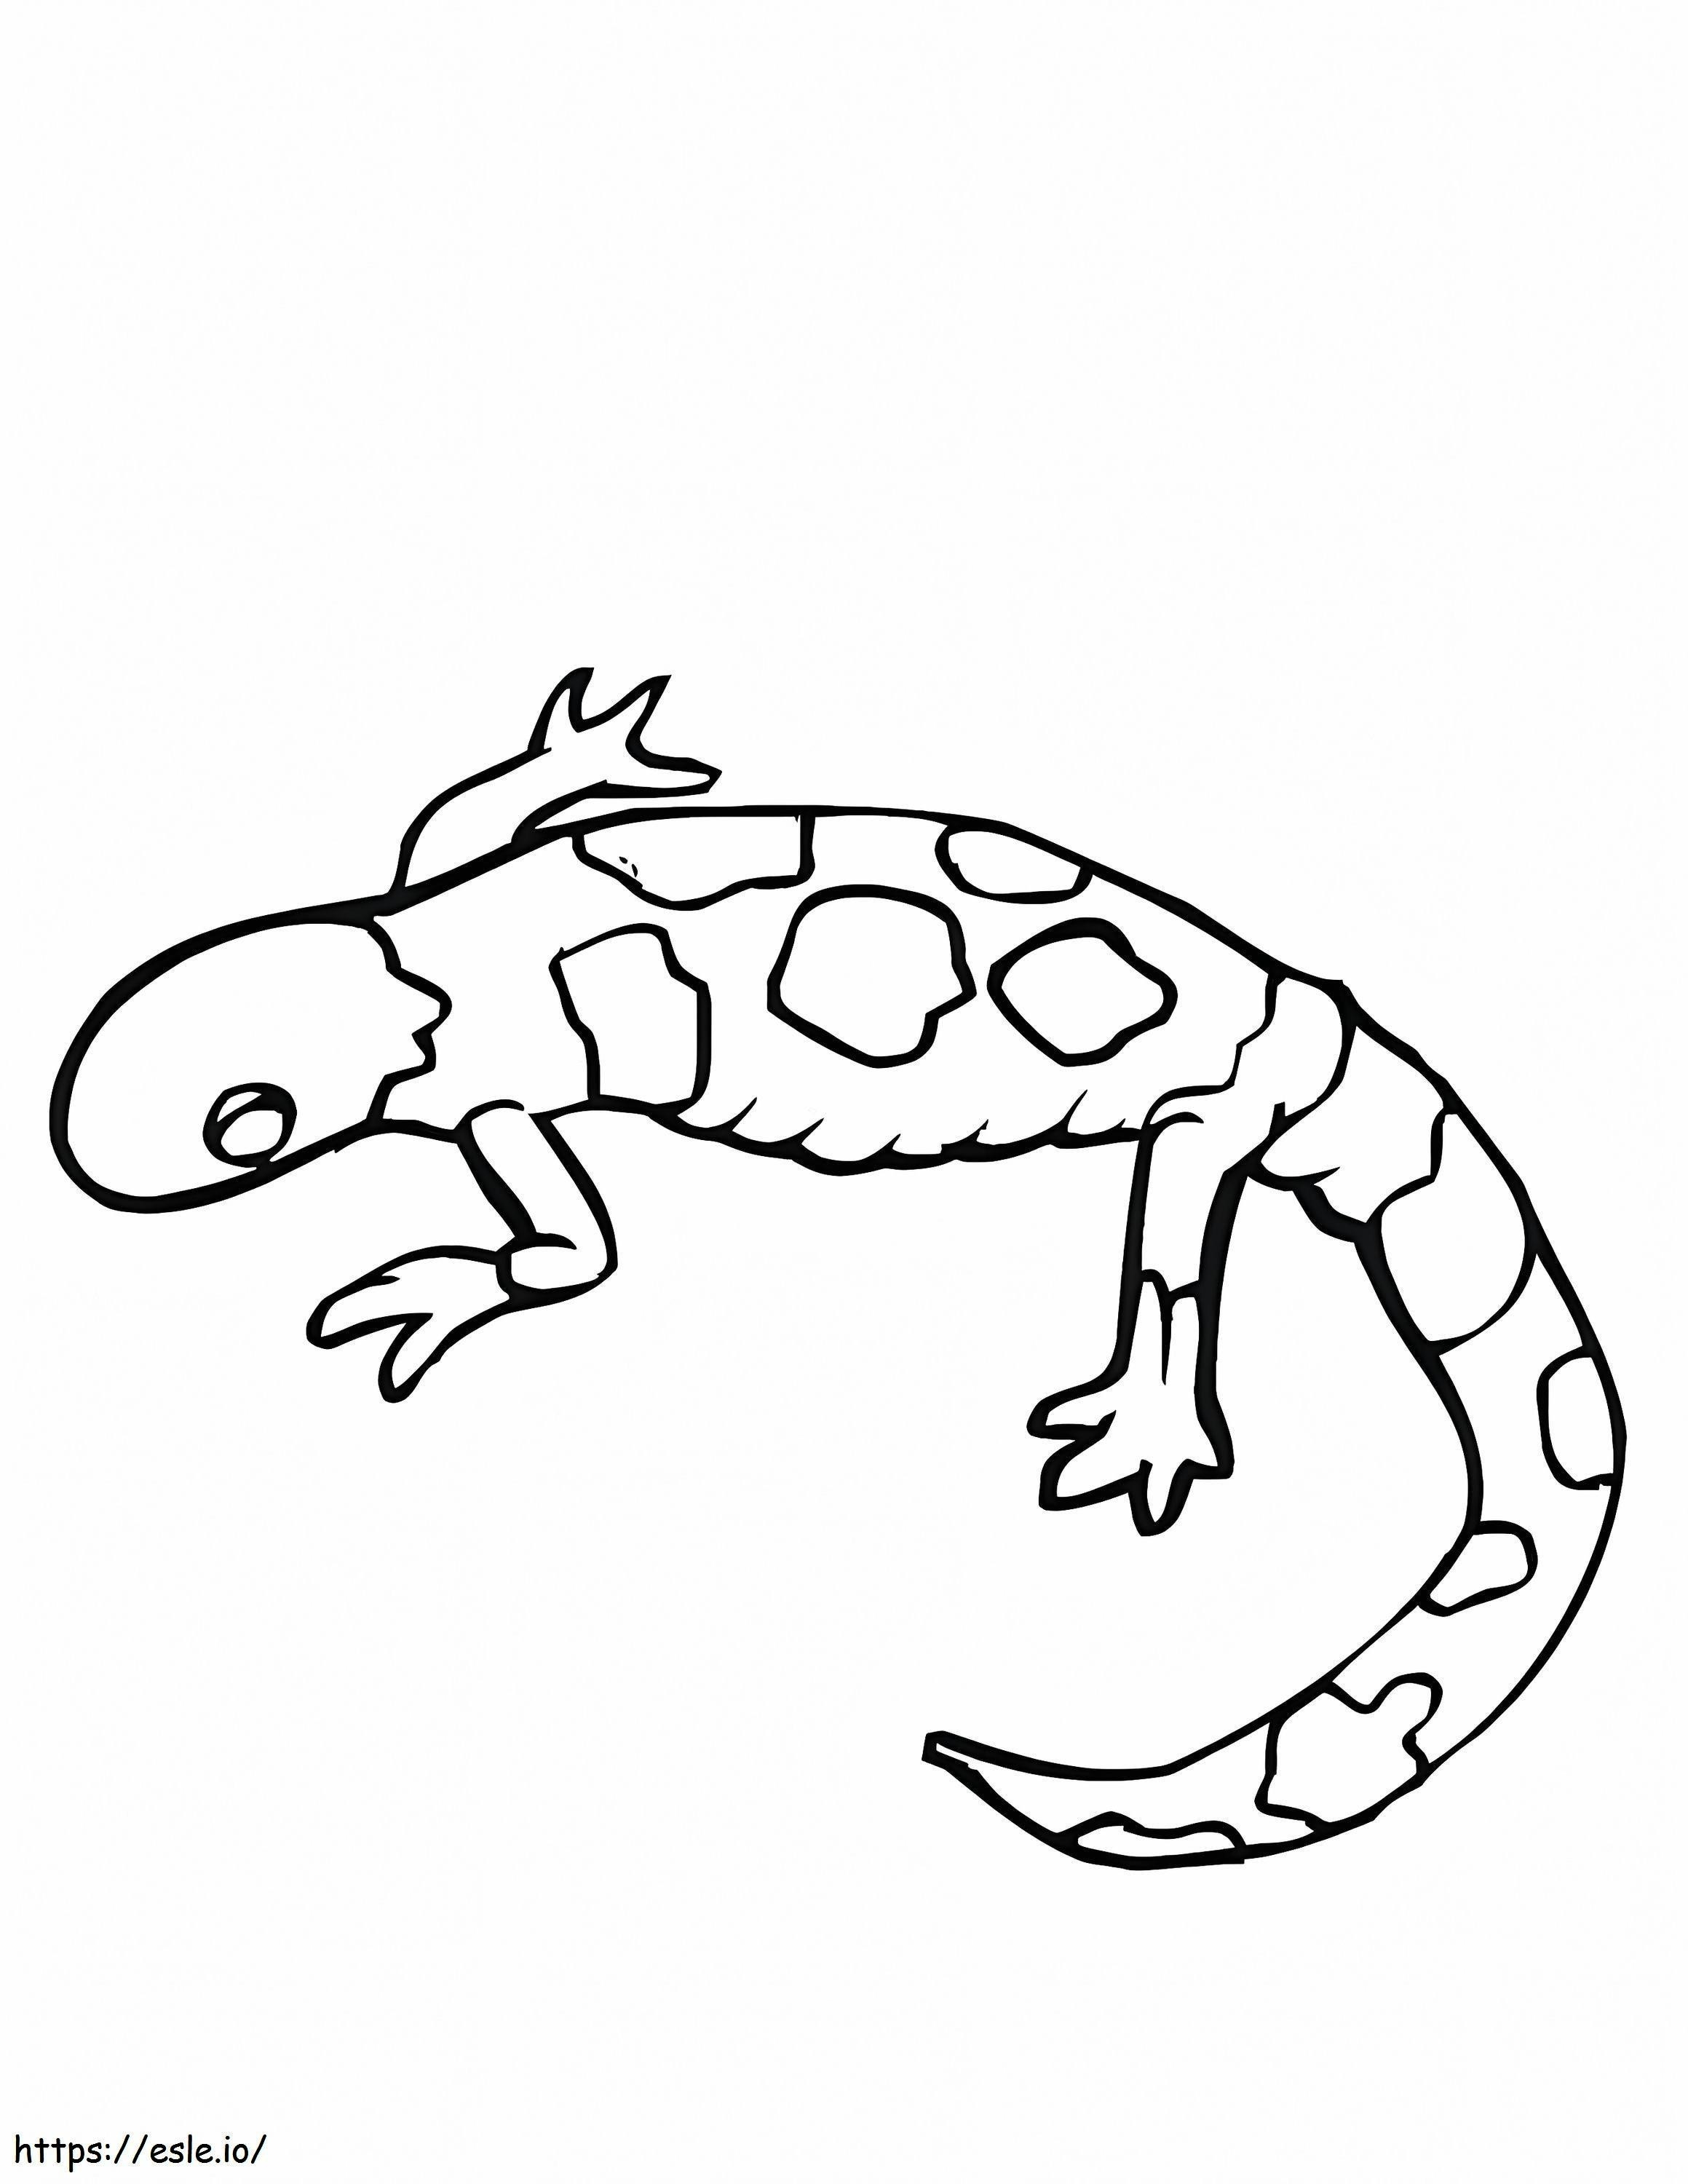 Free Gecko Images coloring page